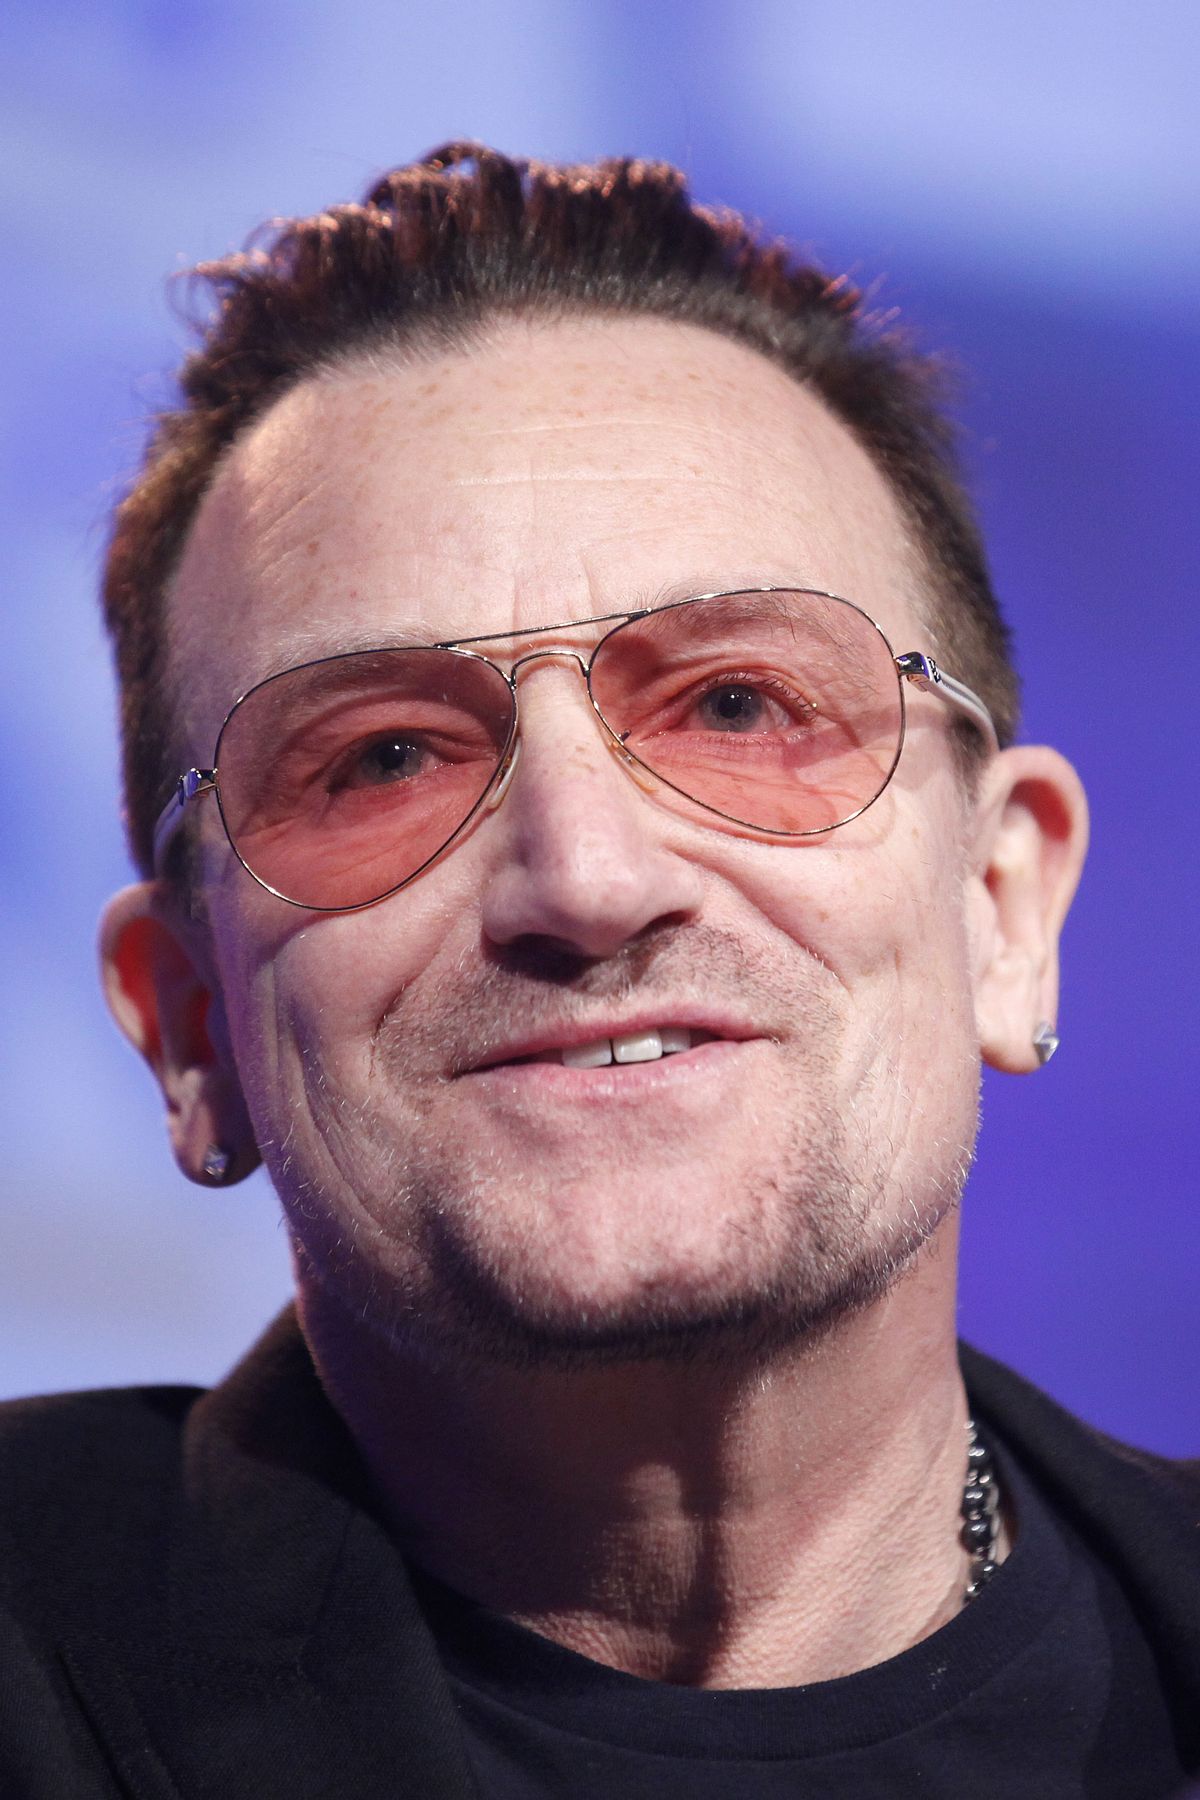 This March 7, 2014, file photo shows Bono speaking to delegates during the European People's Party Elections Congress at the convention center, Dublin, Ireland. (AP Photo/Peter Morrison)